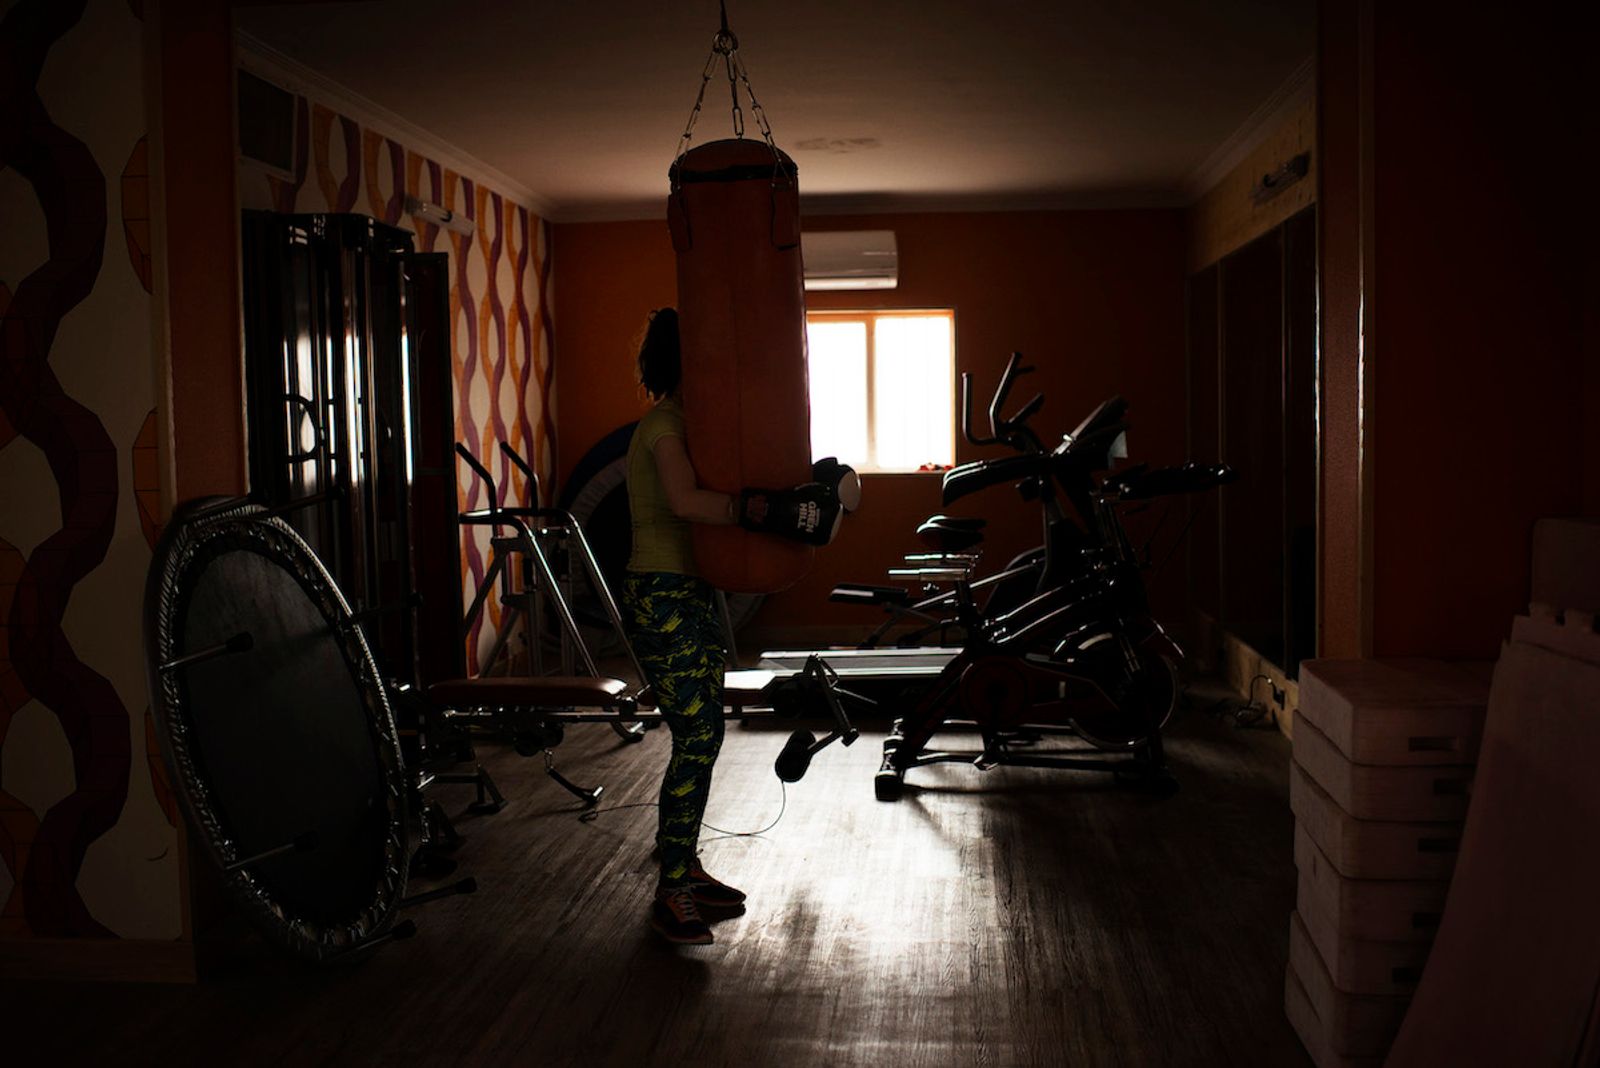 © Marjan Yazdi - Elham is boxing in her gym before the start of her session as a trainer.